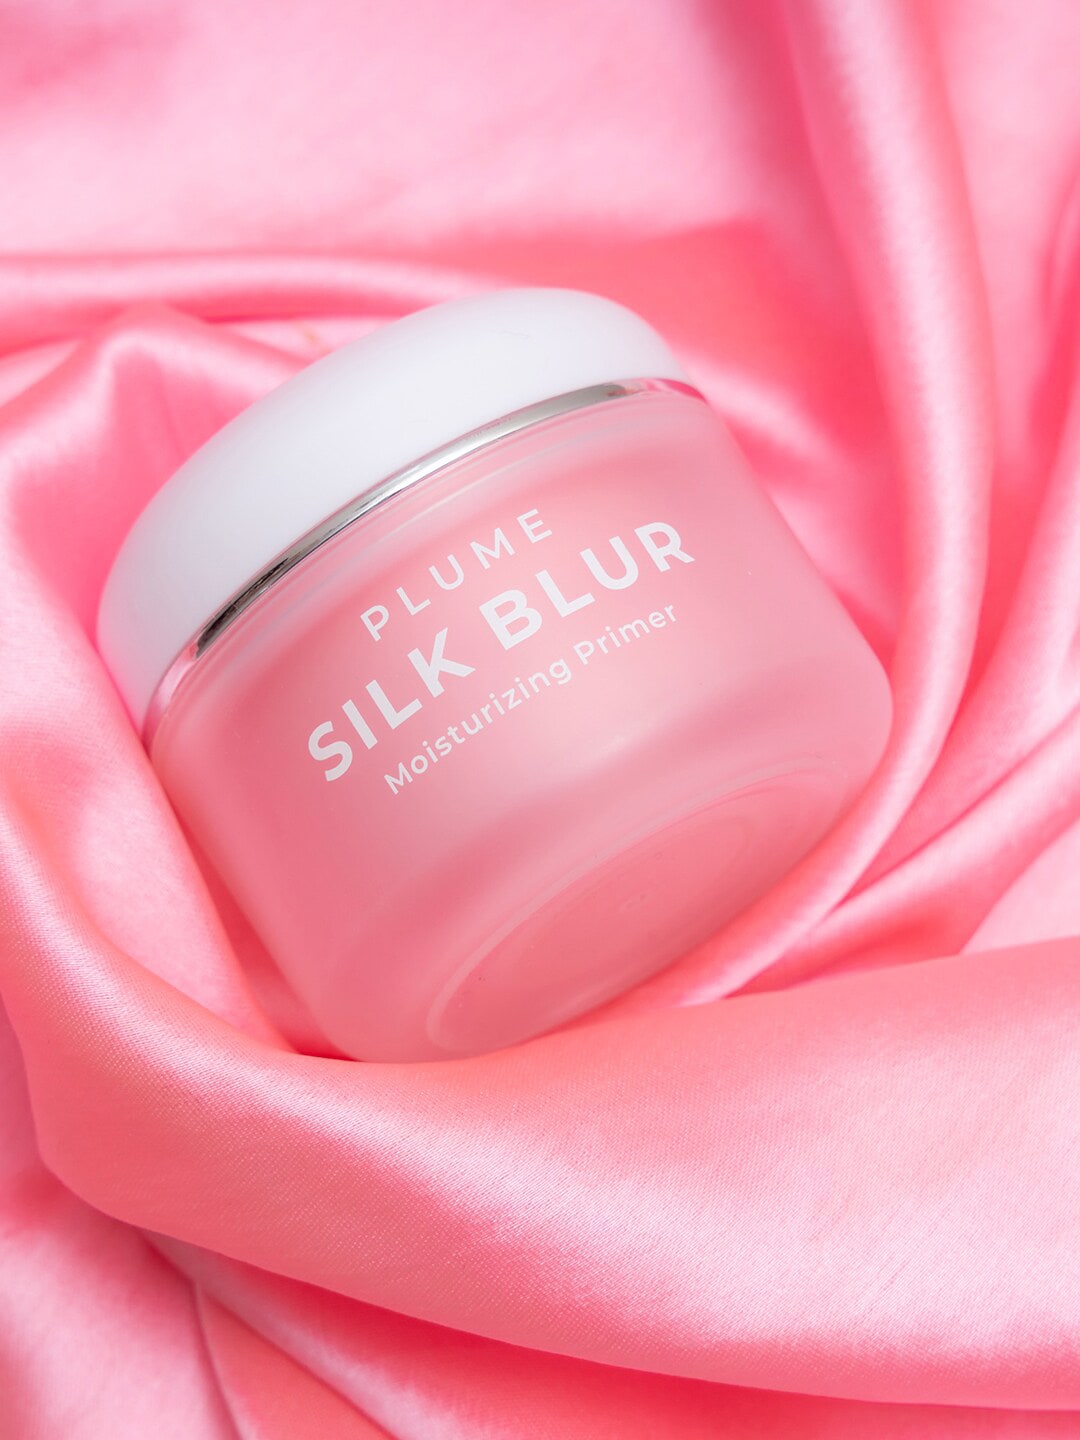 Plume Silk Blur Moisturising Face Primer with Hyaluronic Acid & Avocado Extracts - 50g Price in India